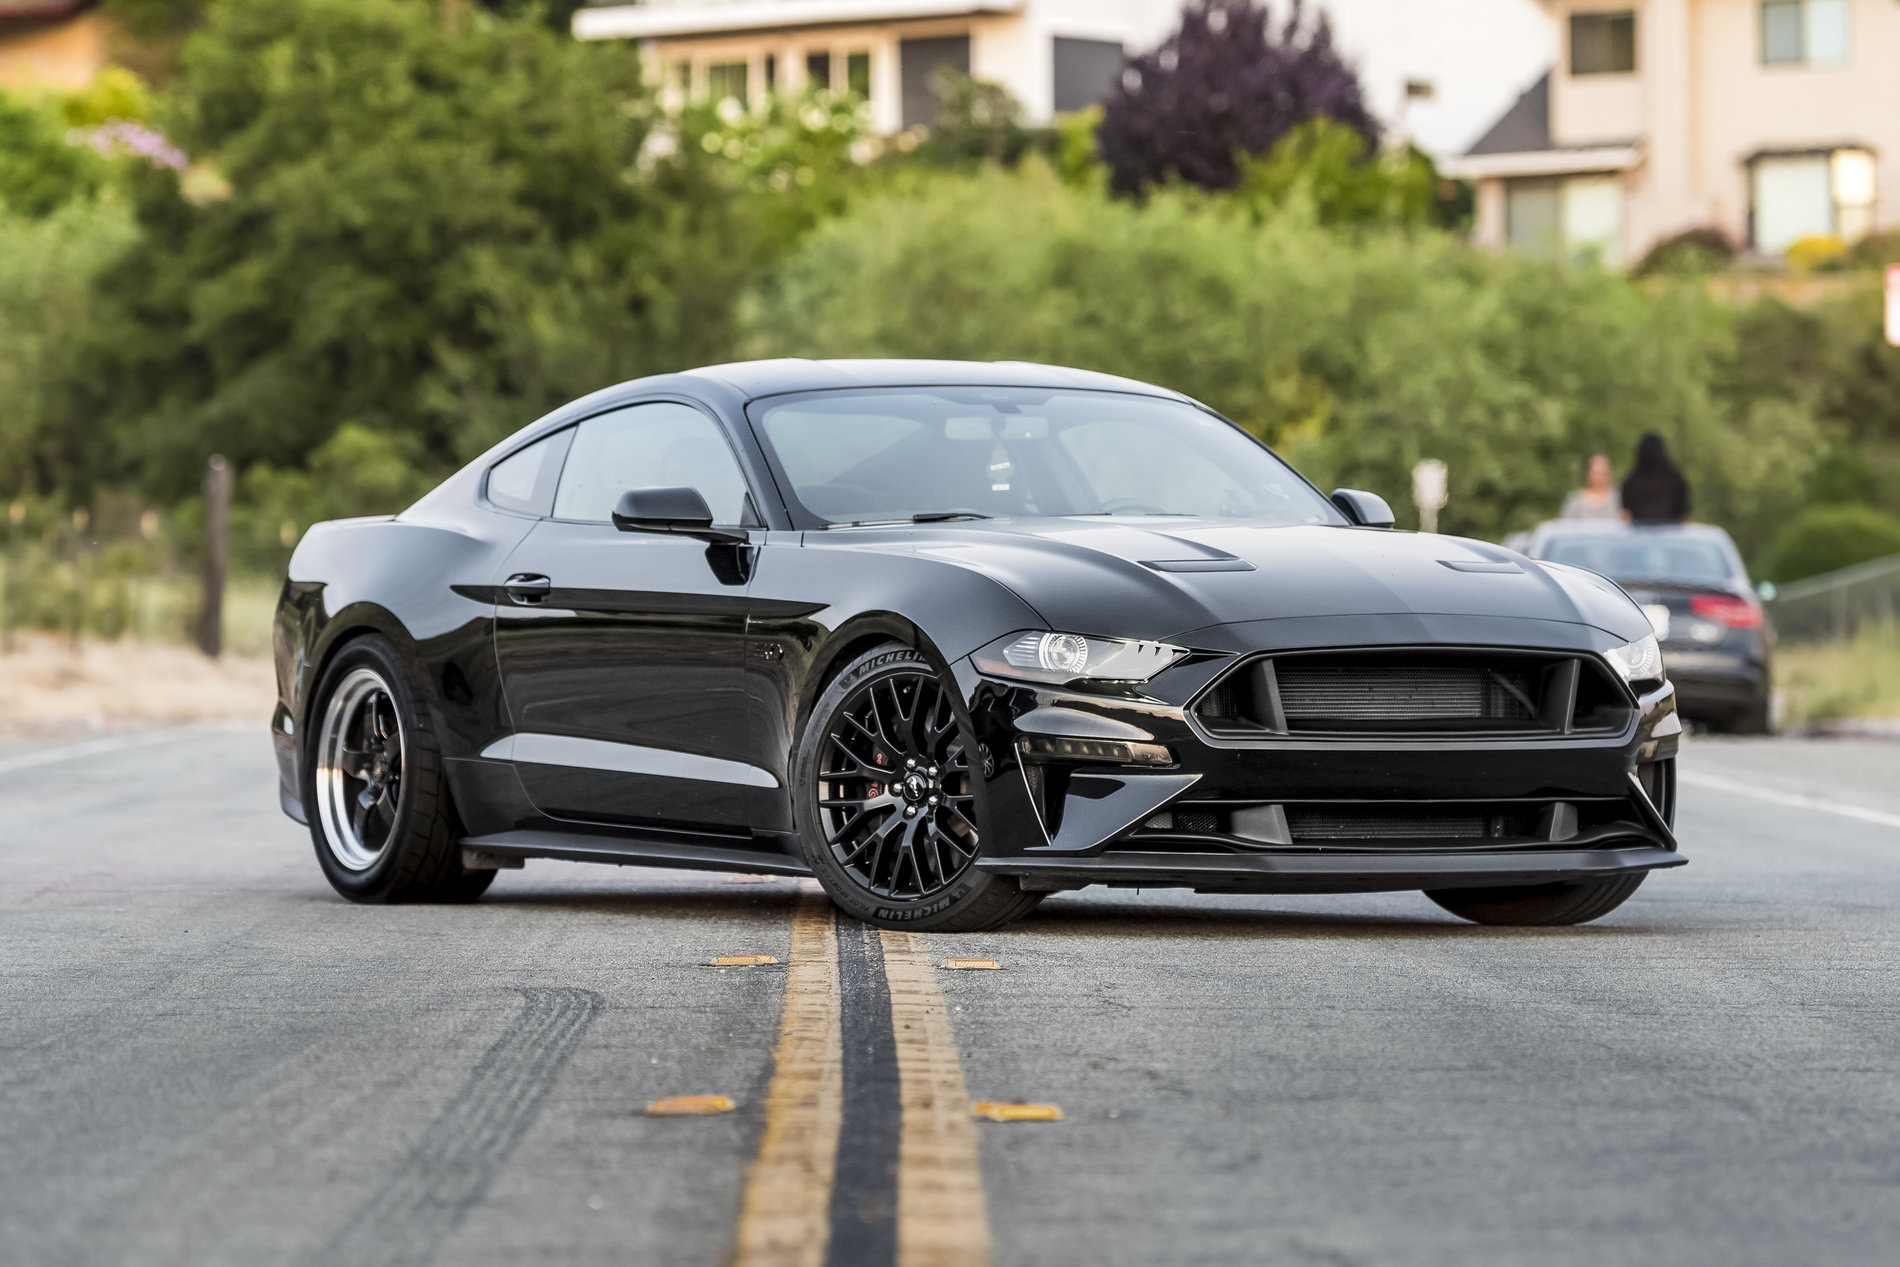 BLACK S550 MUSTANG Thread | Page 190 | 2015+ S550 Mustang Forum (GT ...